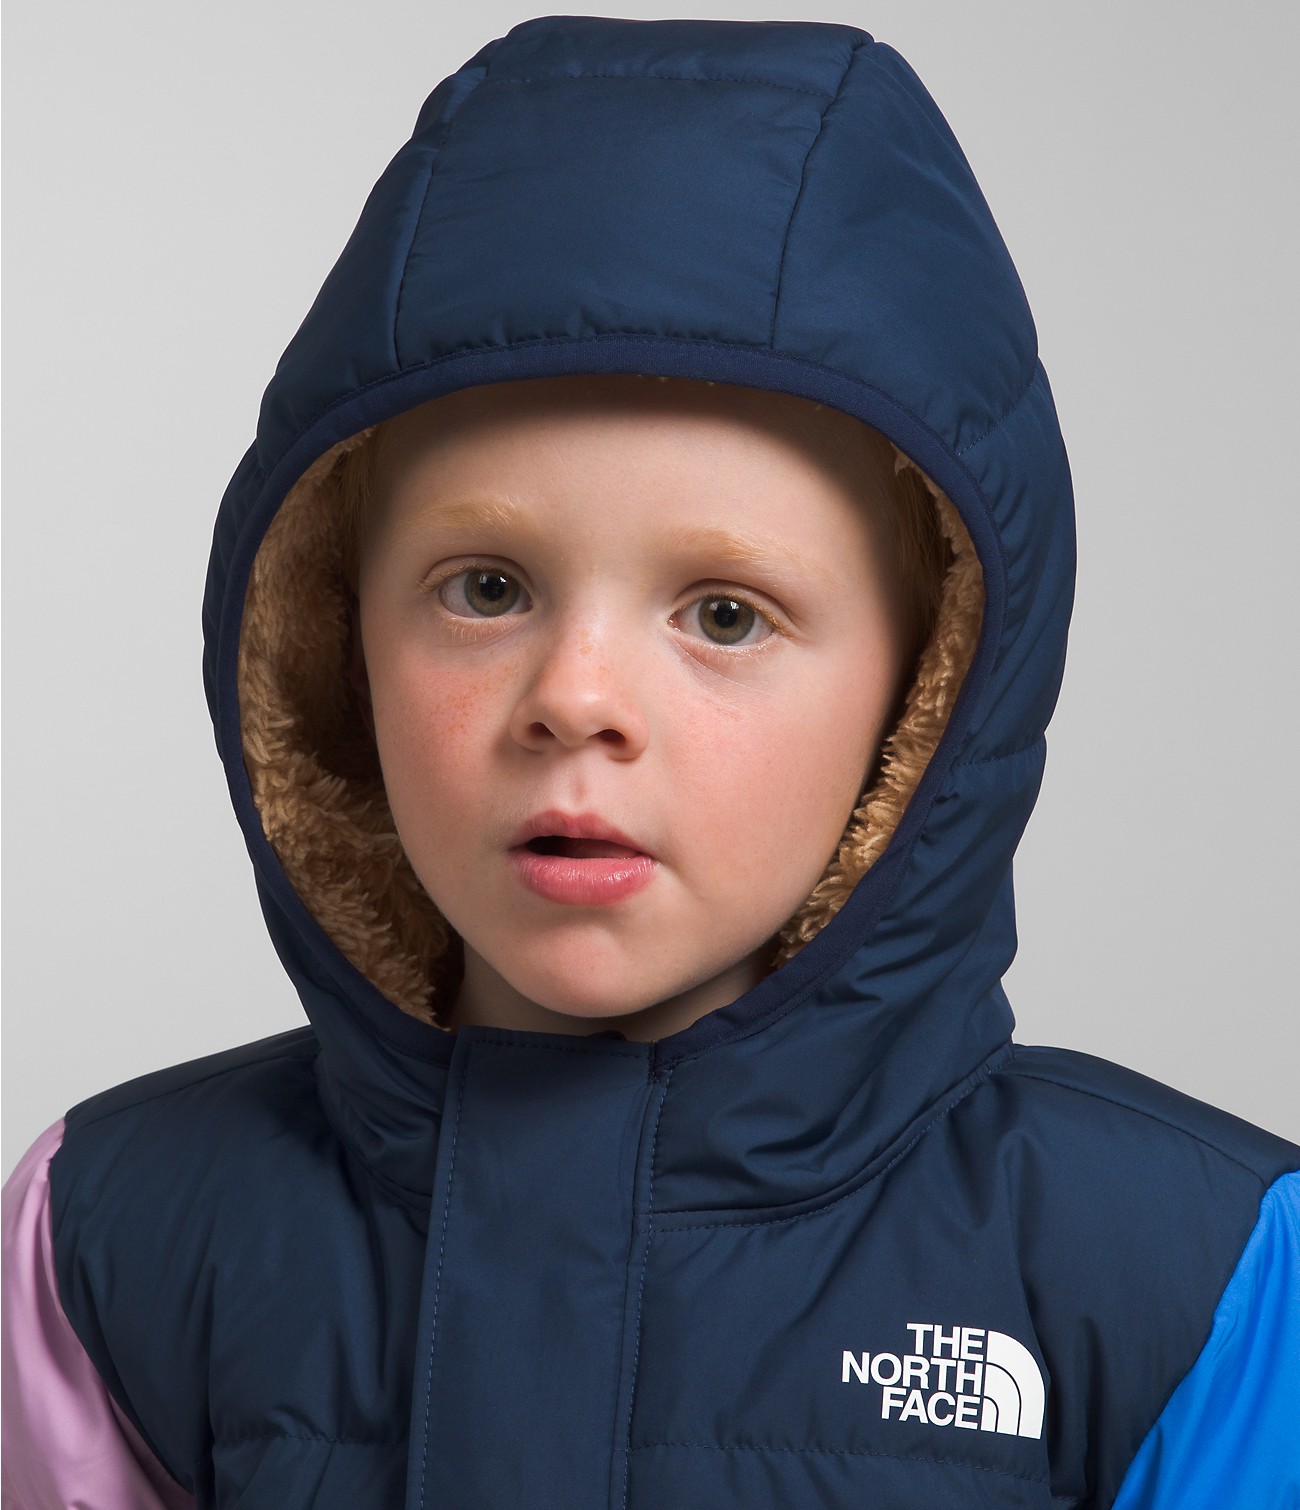 Kids’ North Down Hooded Jacket | The Face